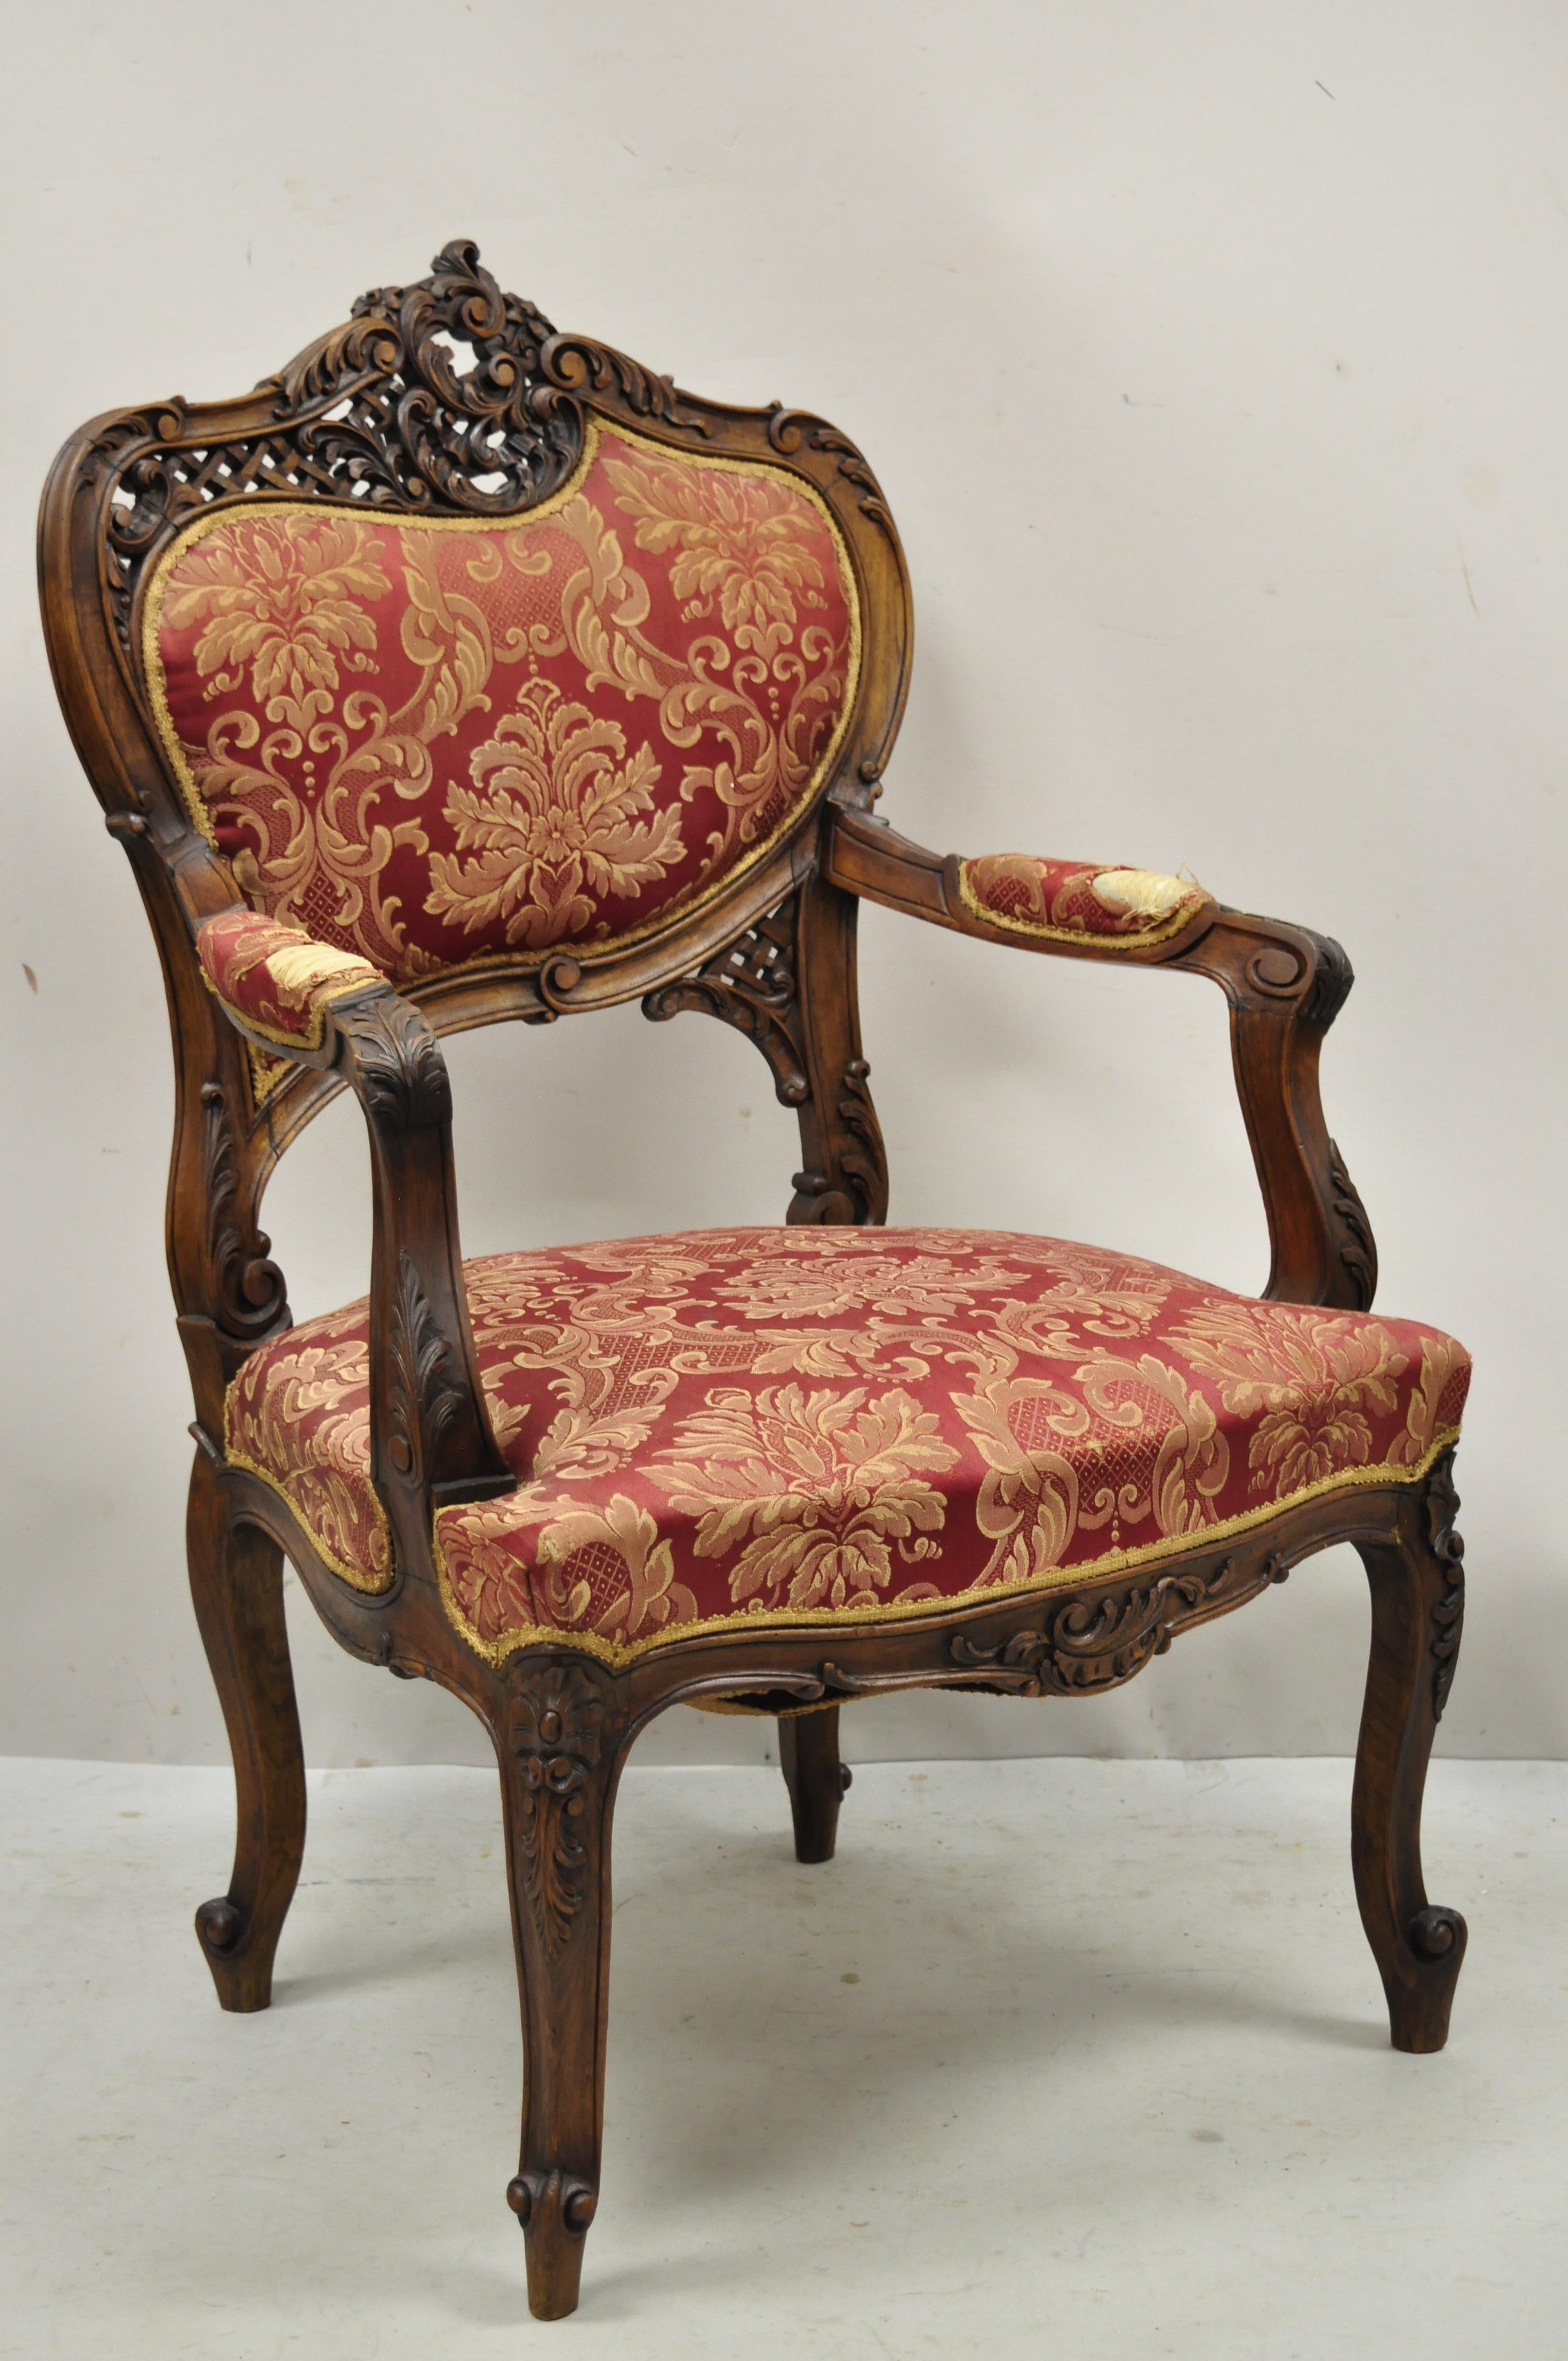 Antique Victorian French style finely carved Mahogany wood parlor arm chair. Item features solid wood frame, beautiful wood grain, nicely carved details, cabriole legs, very nice antique item, great style form. Circa early 1900s. Measurements: 39.5